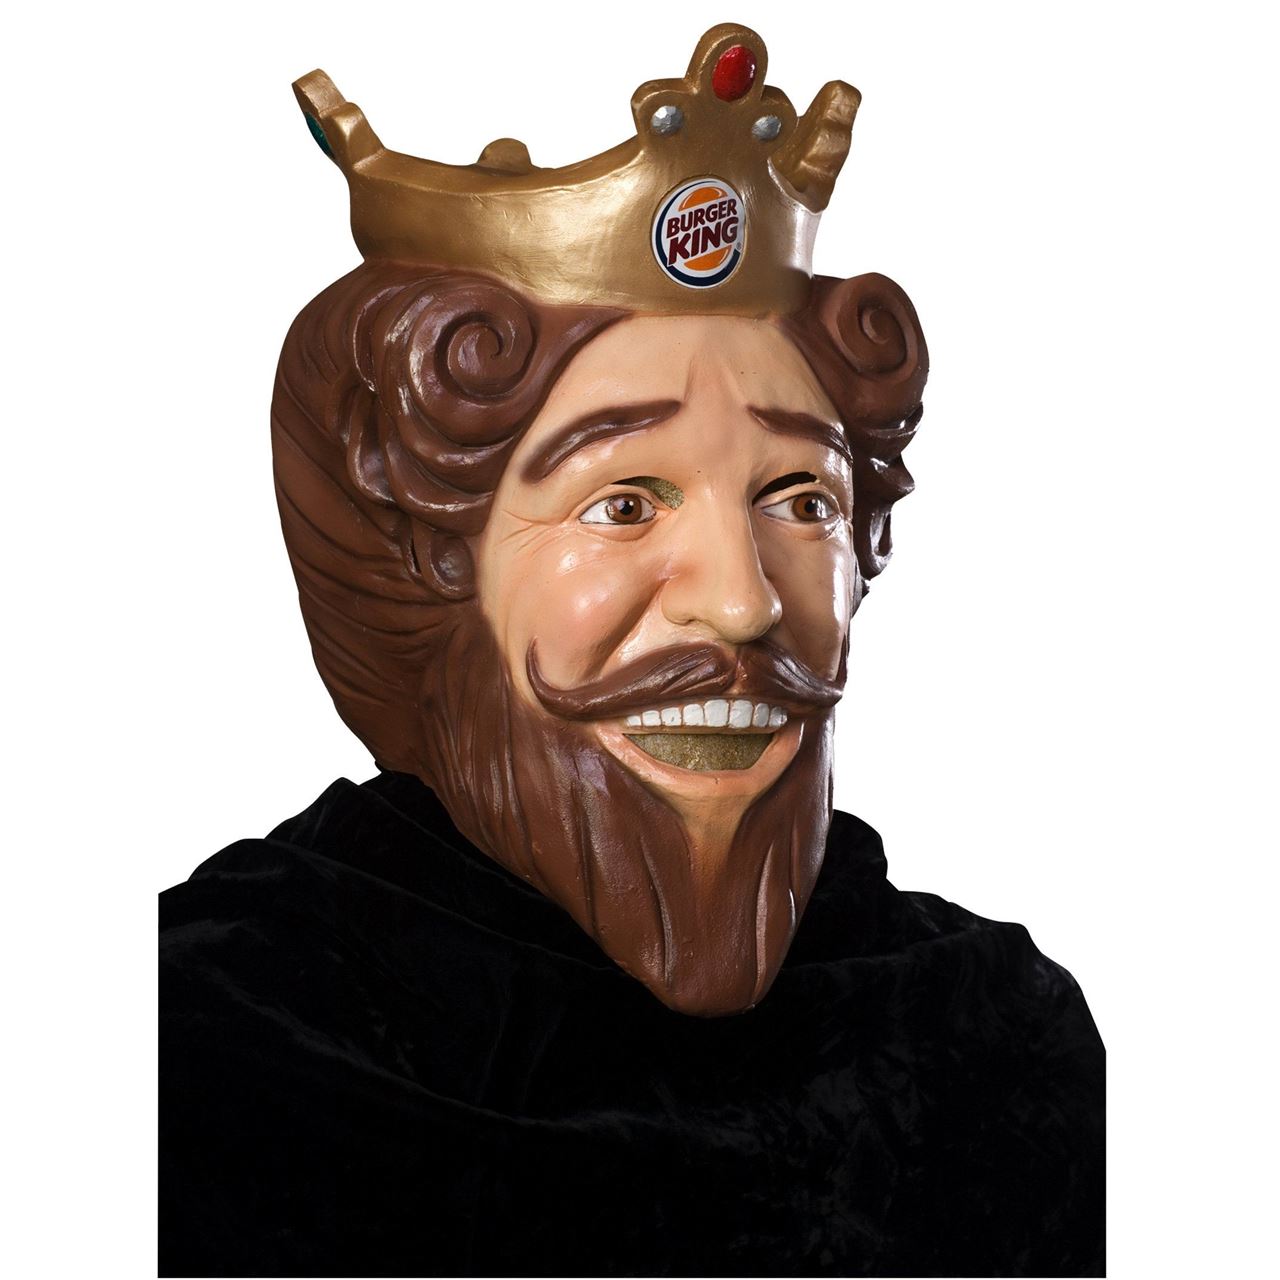 Have you ever seen the burger king?